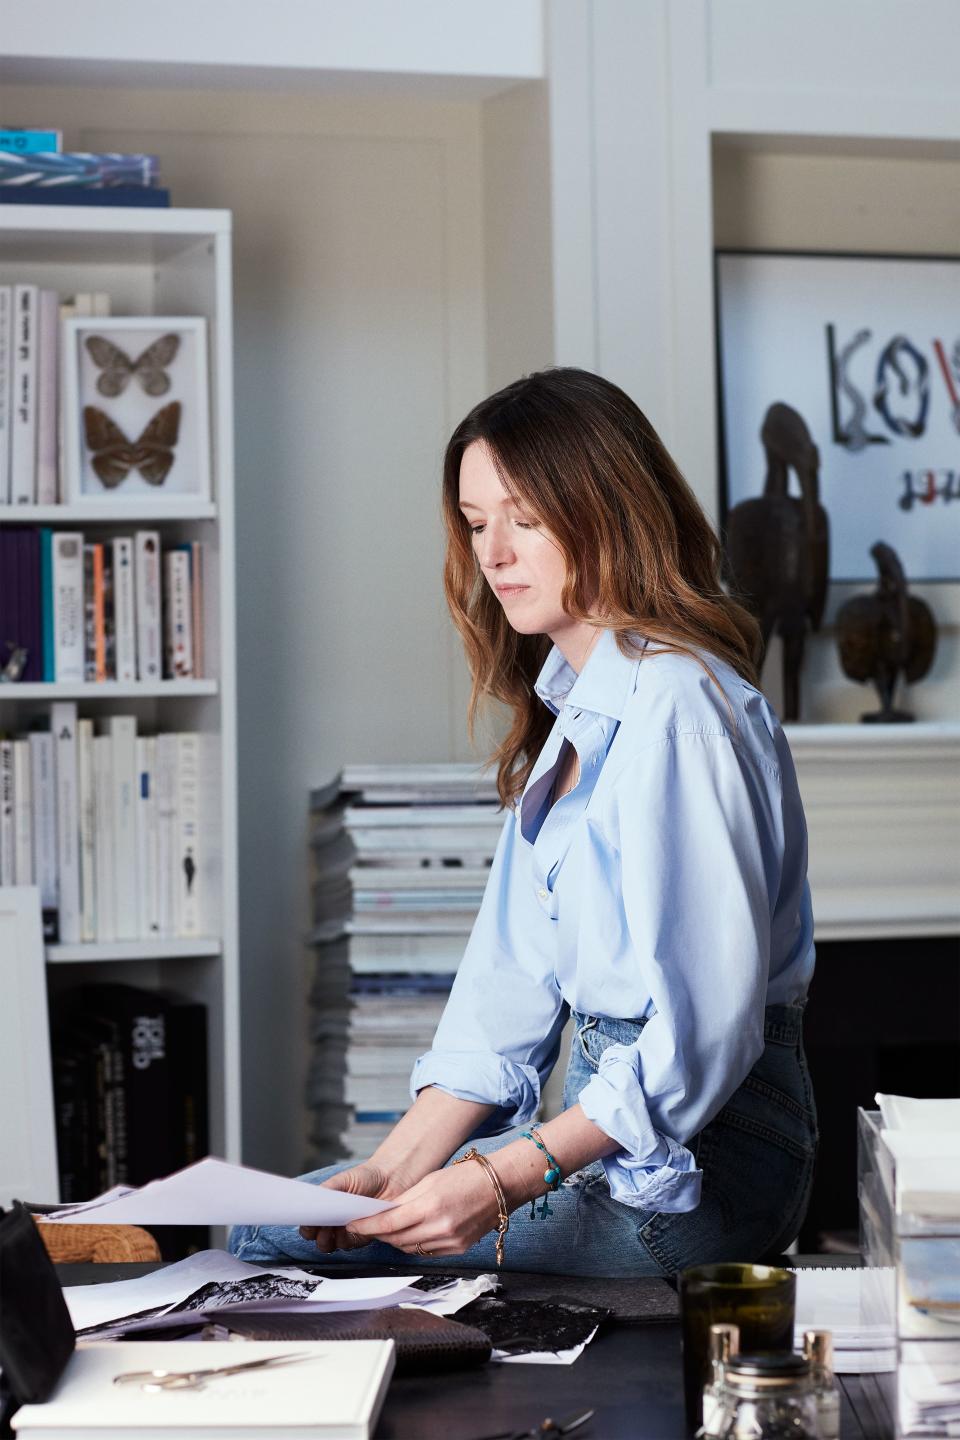 Since becoming Givenchy’s first female creative director, Clare Waight Keller has done far more than dress a duchess—she’s tried on change and finds it fits just fine.